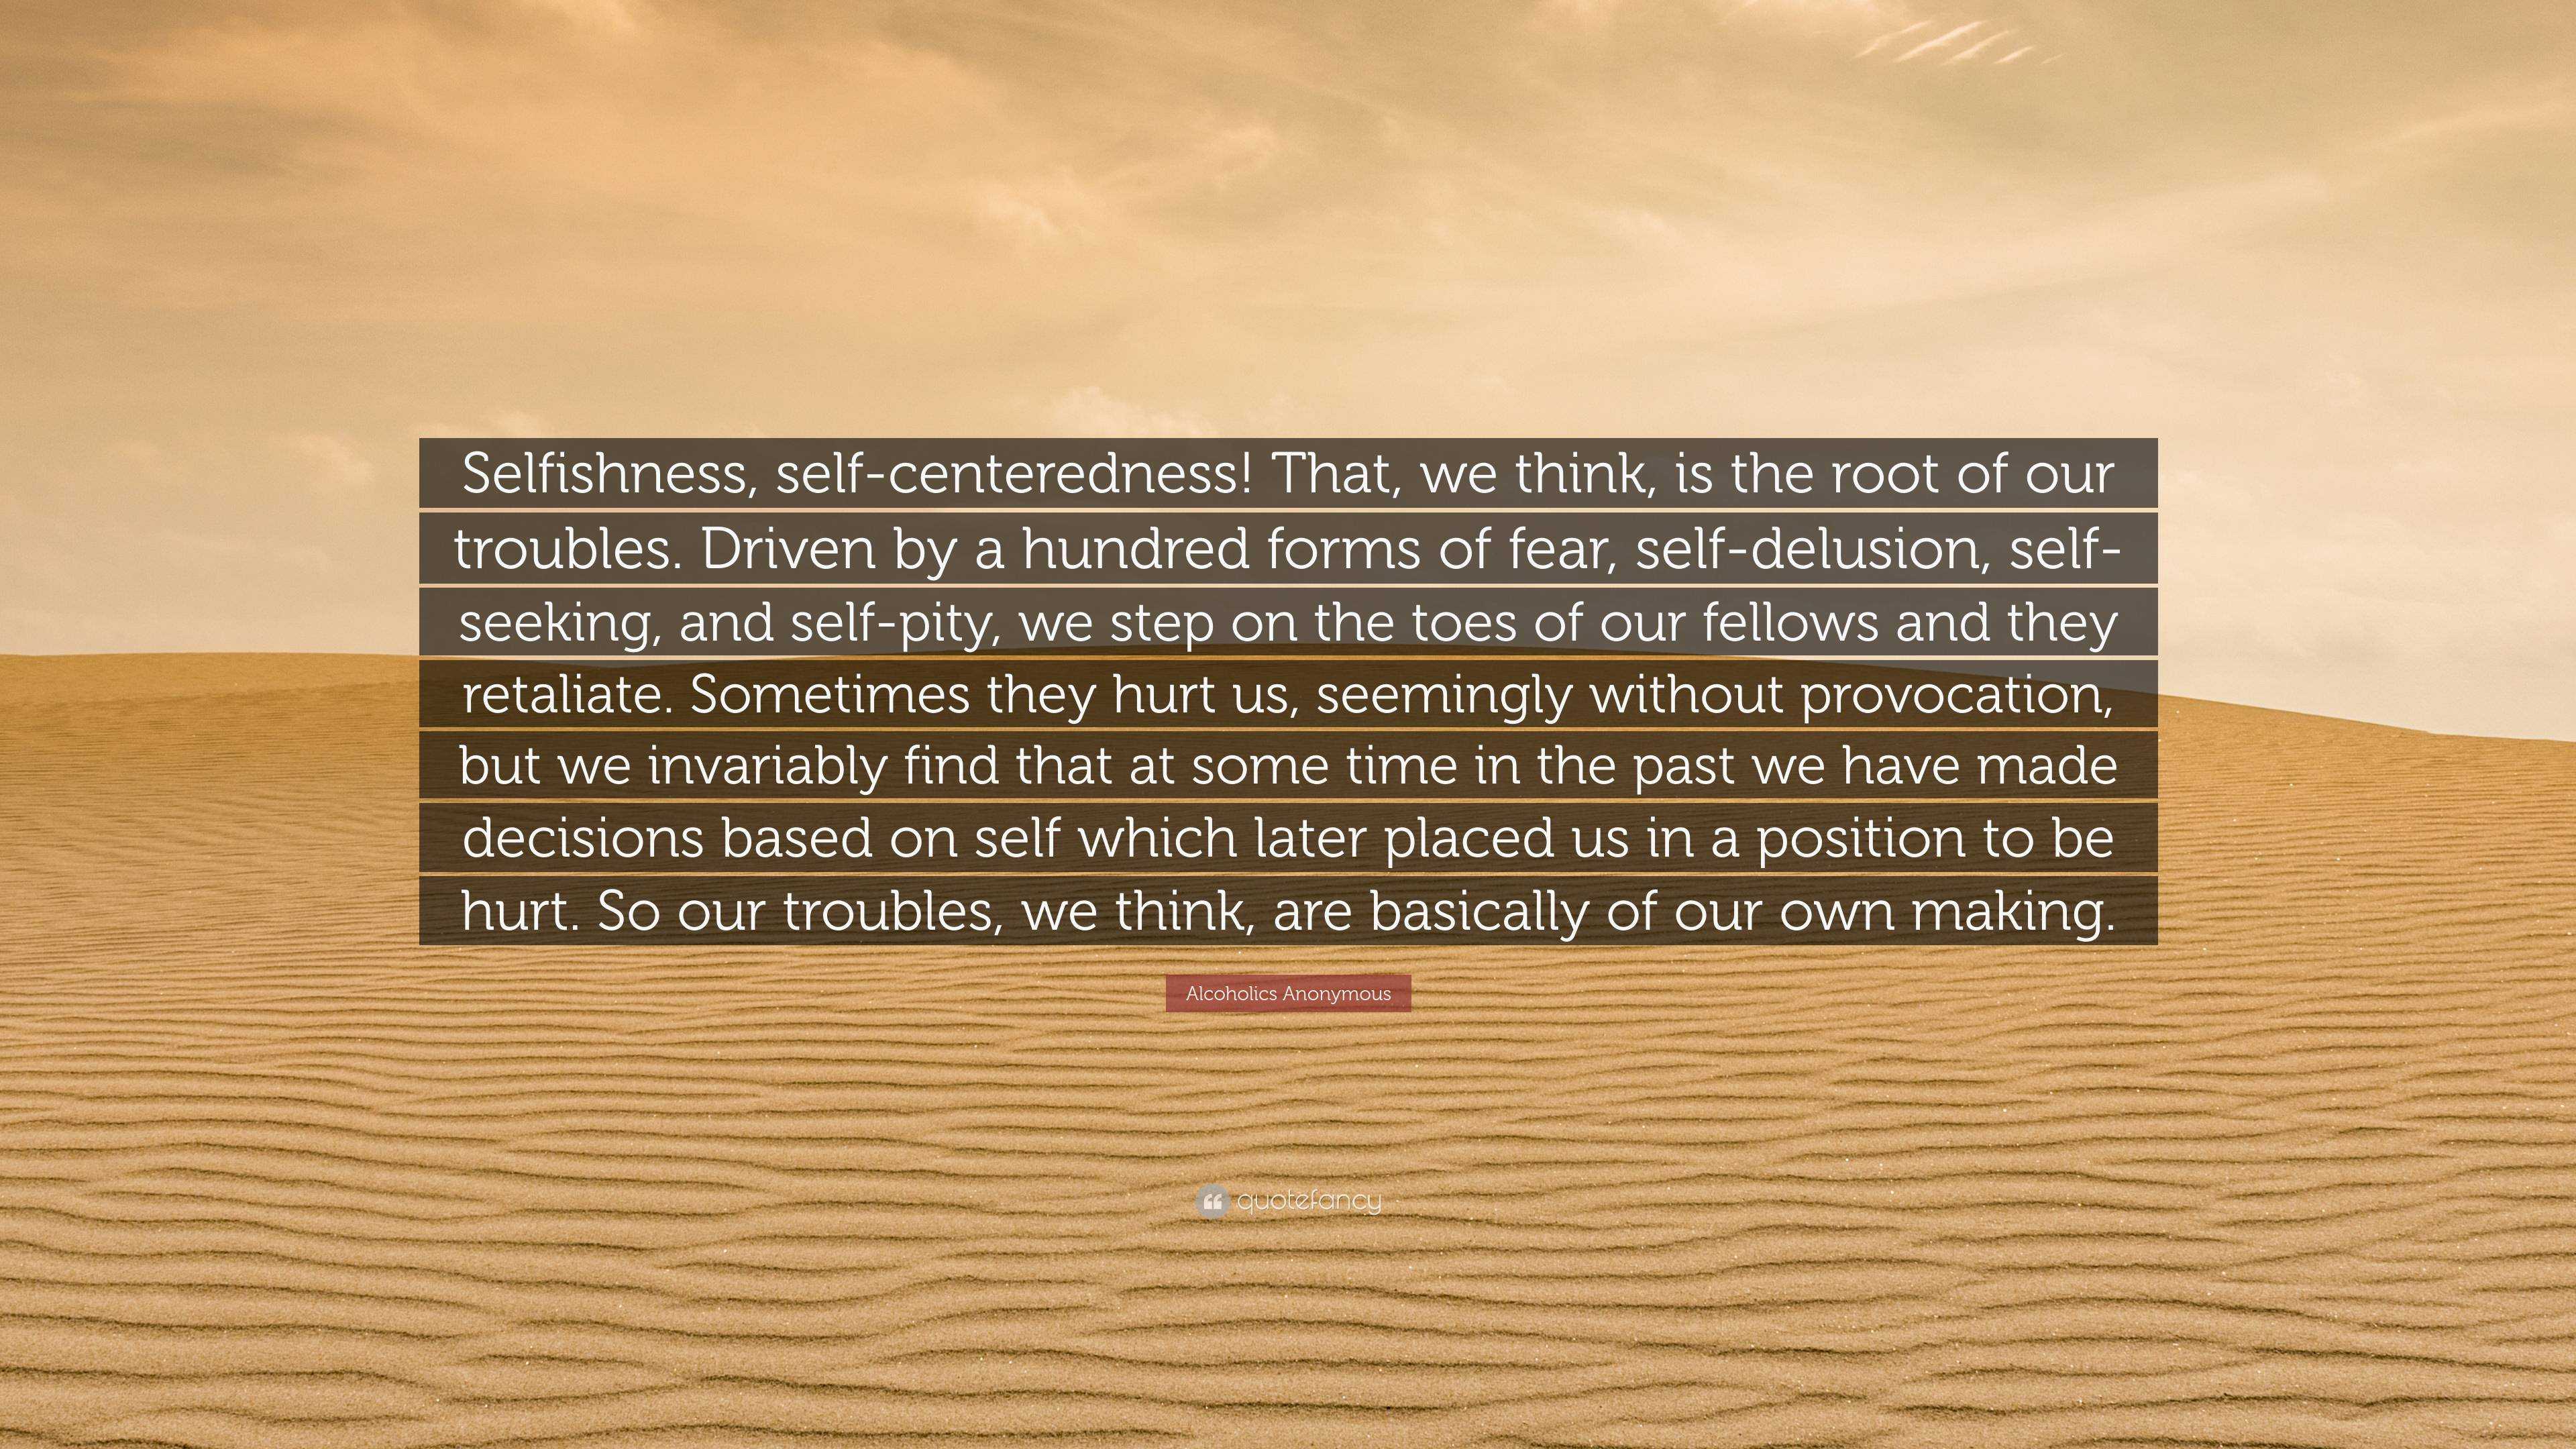 alcoholics-anonymous-quote-selfishness-self-centeredness-that-we